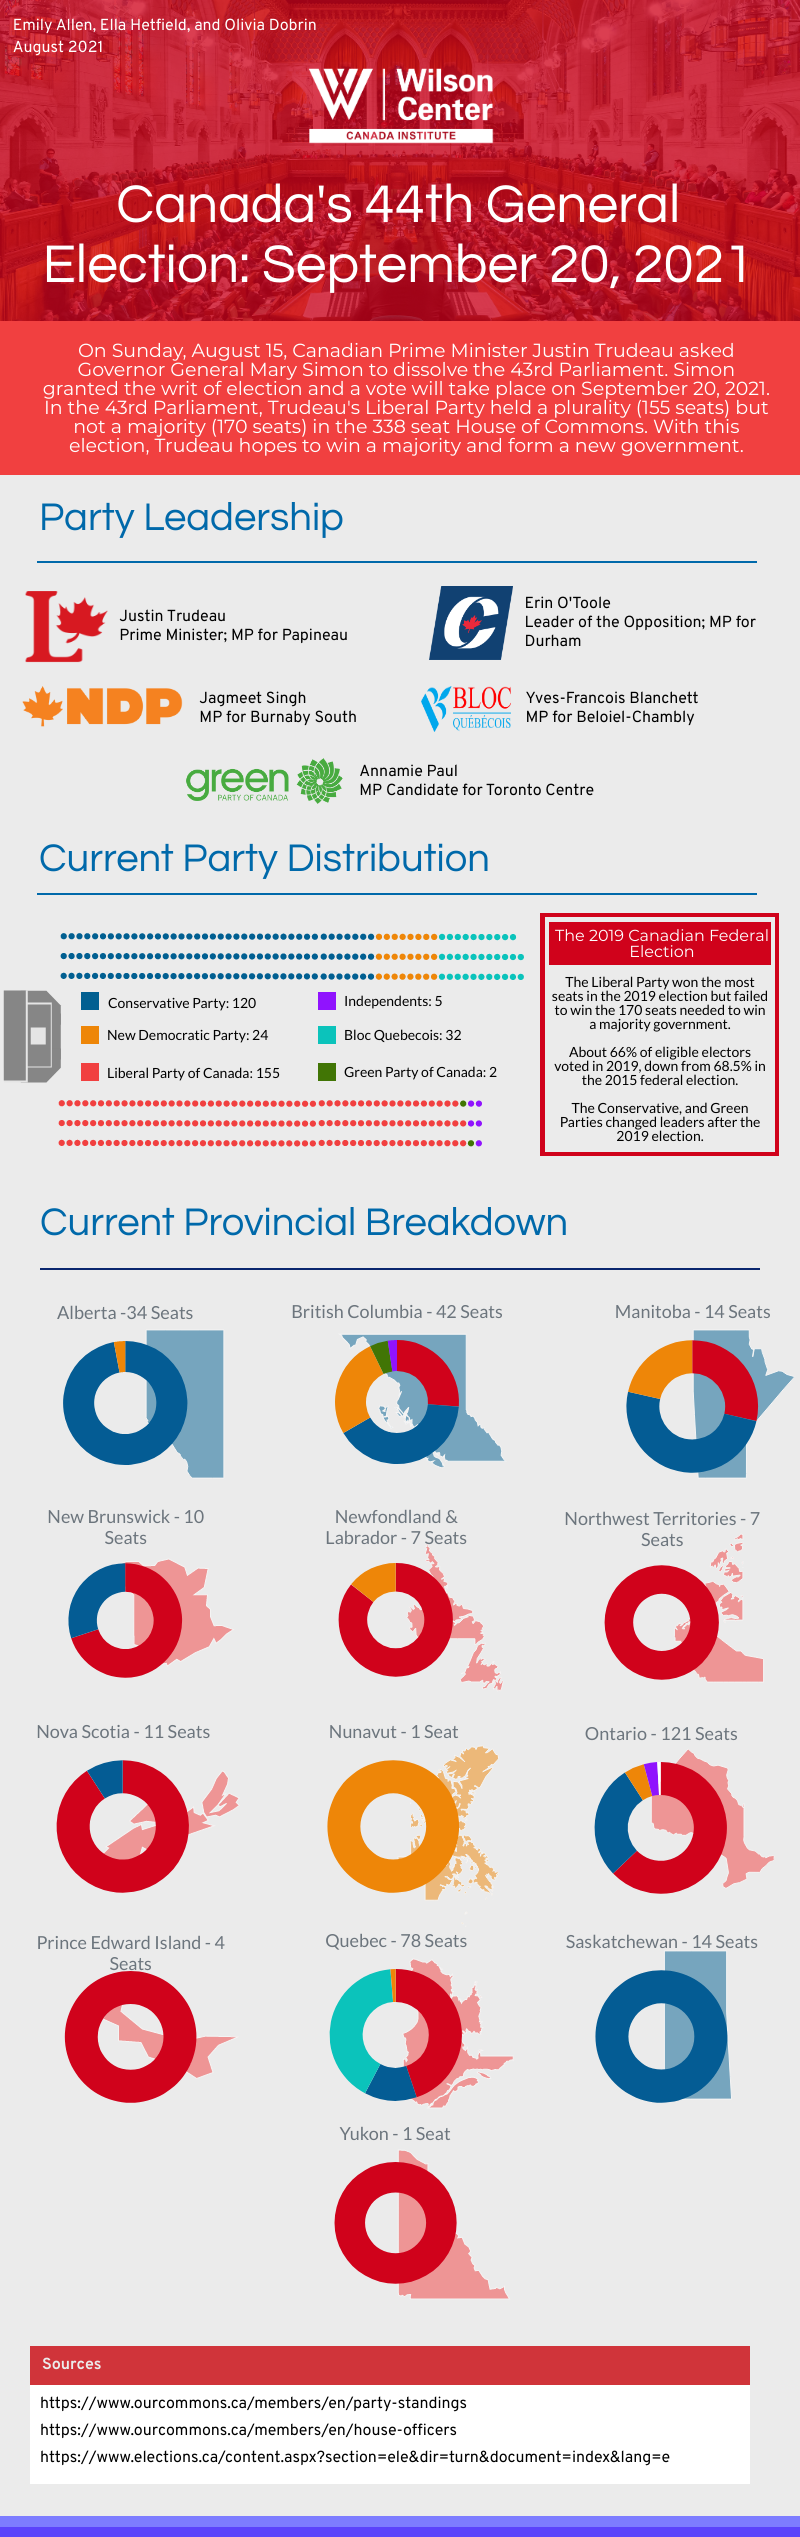 Canada's 44th General Election Infographic